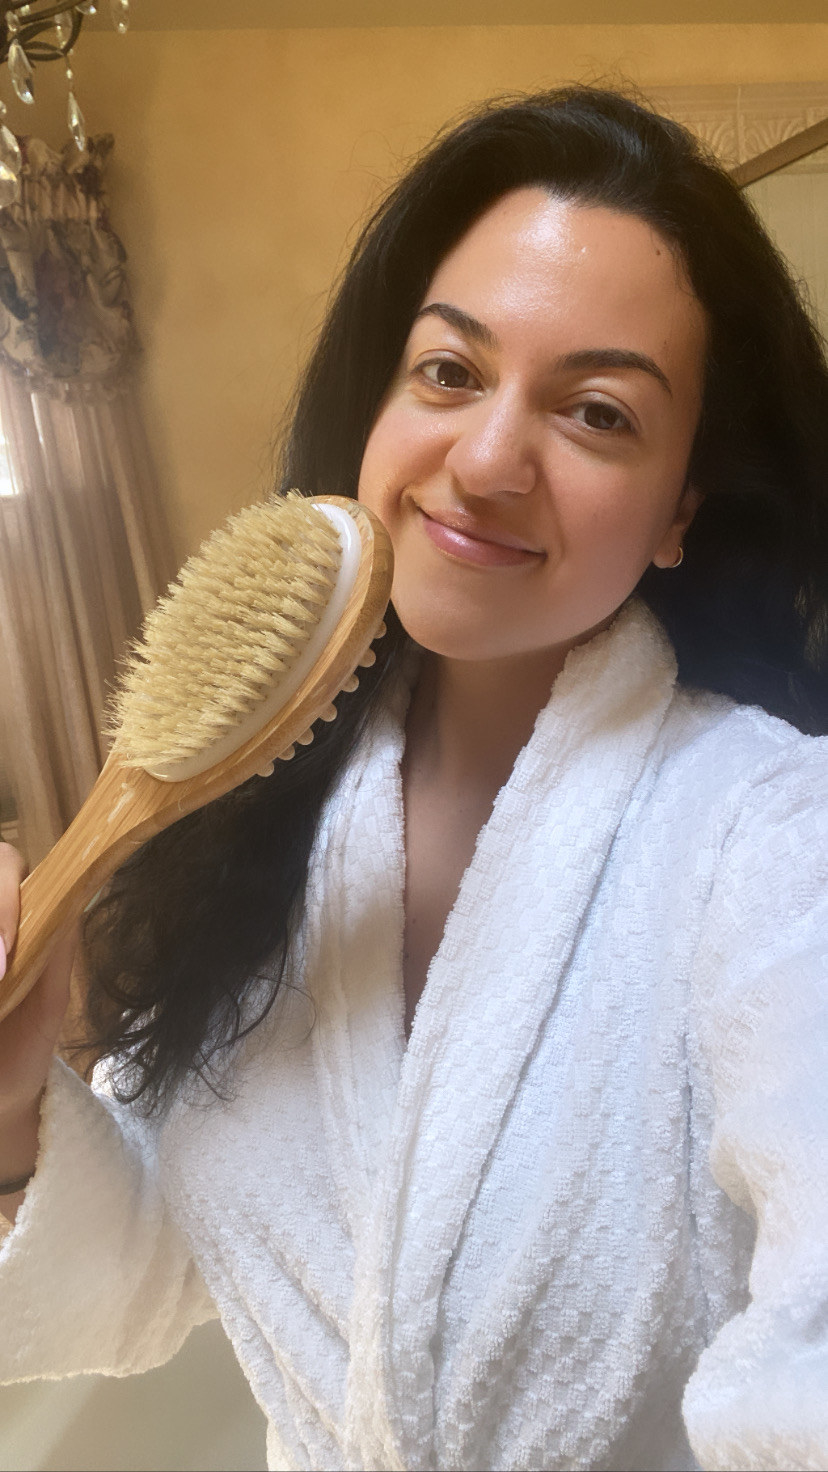 The author smiling and holding her dry brush